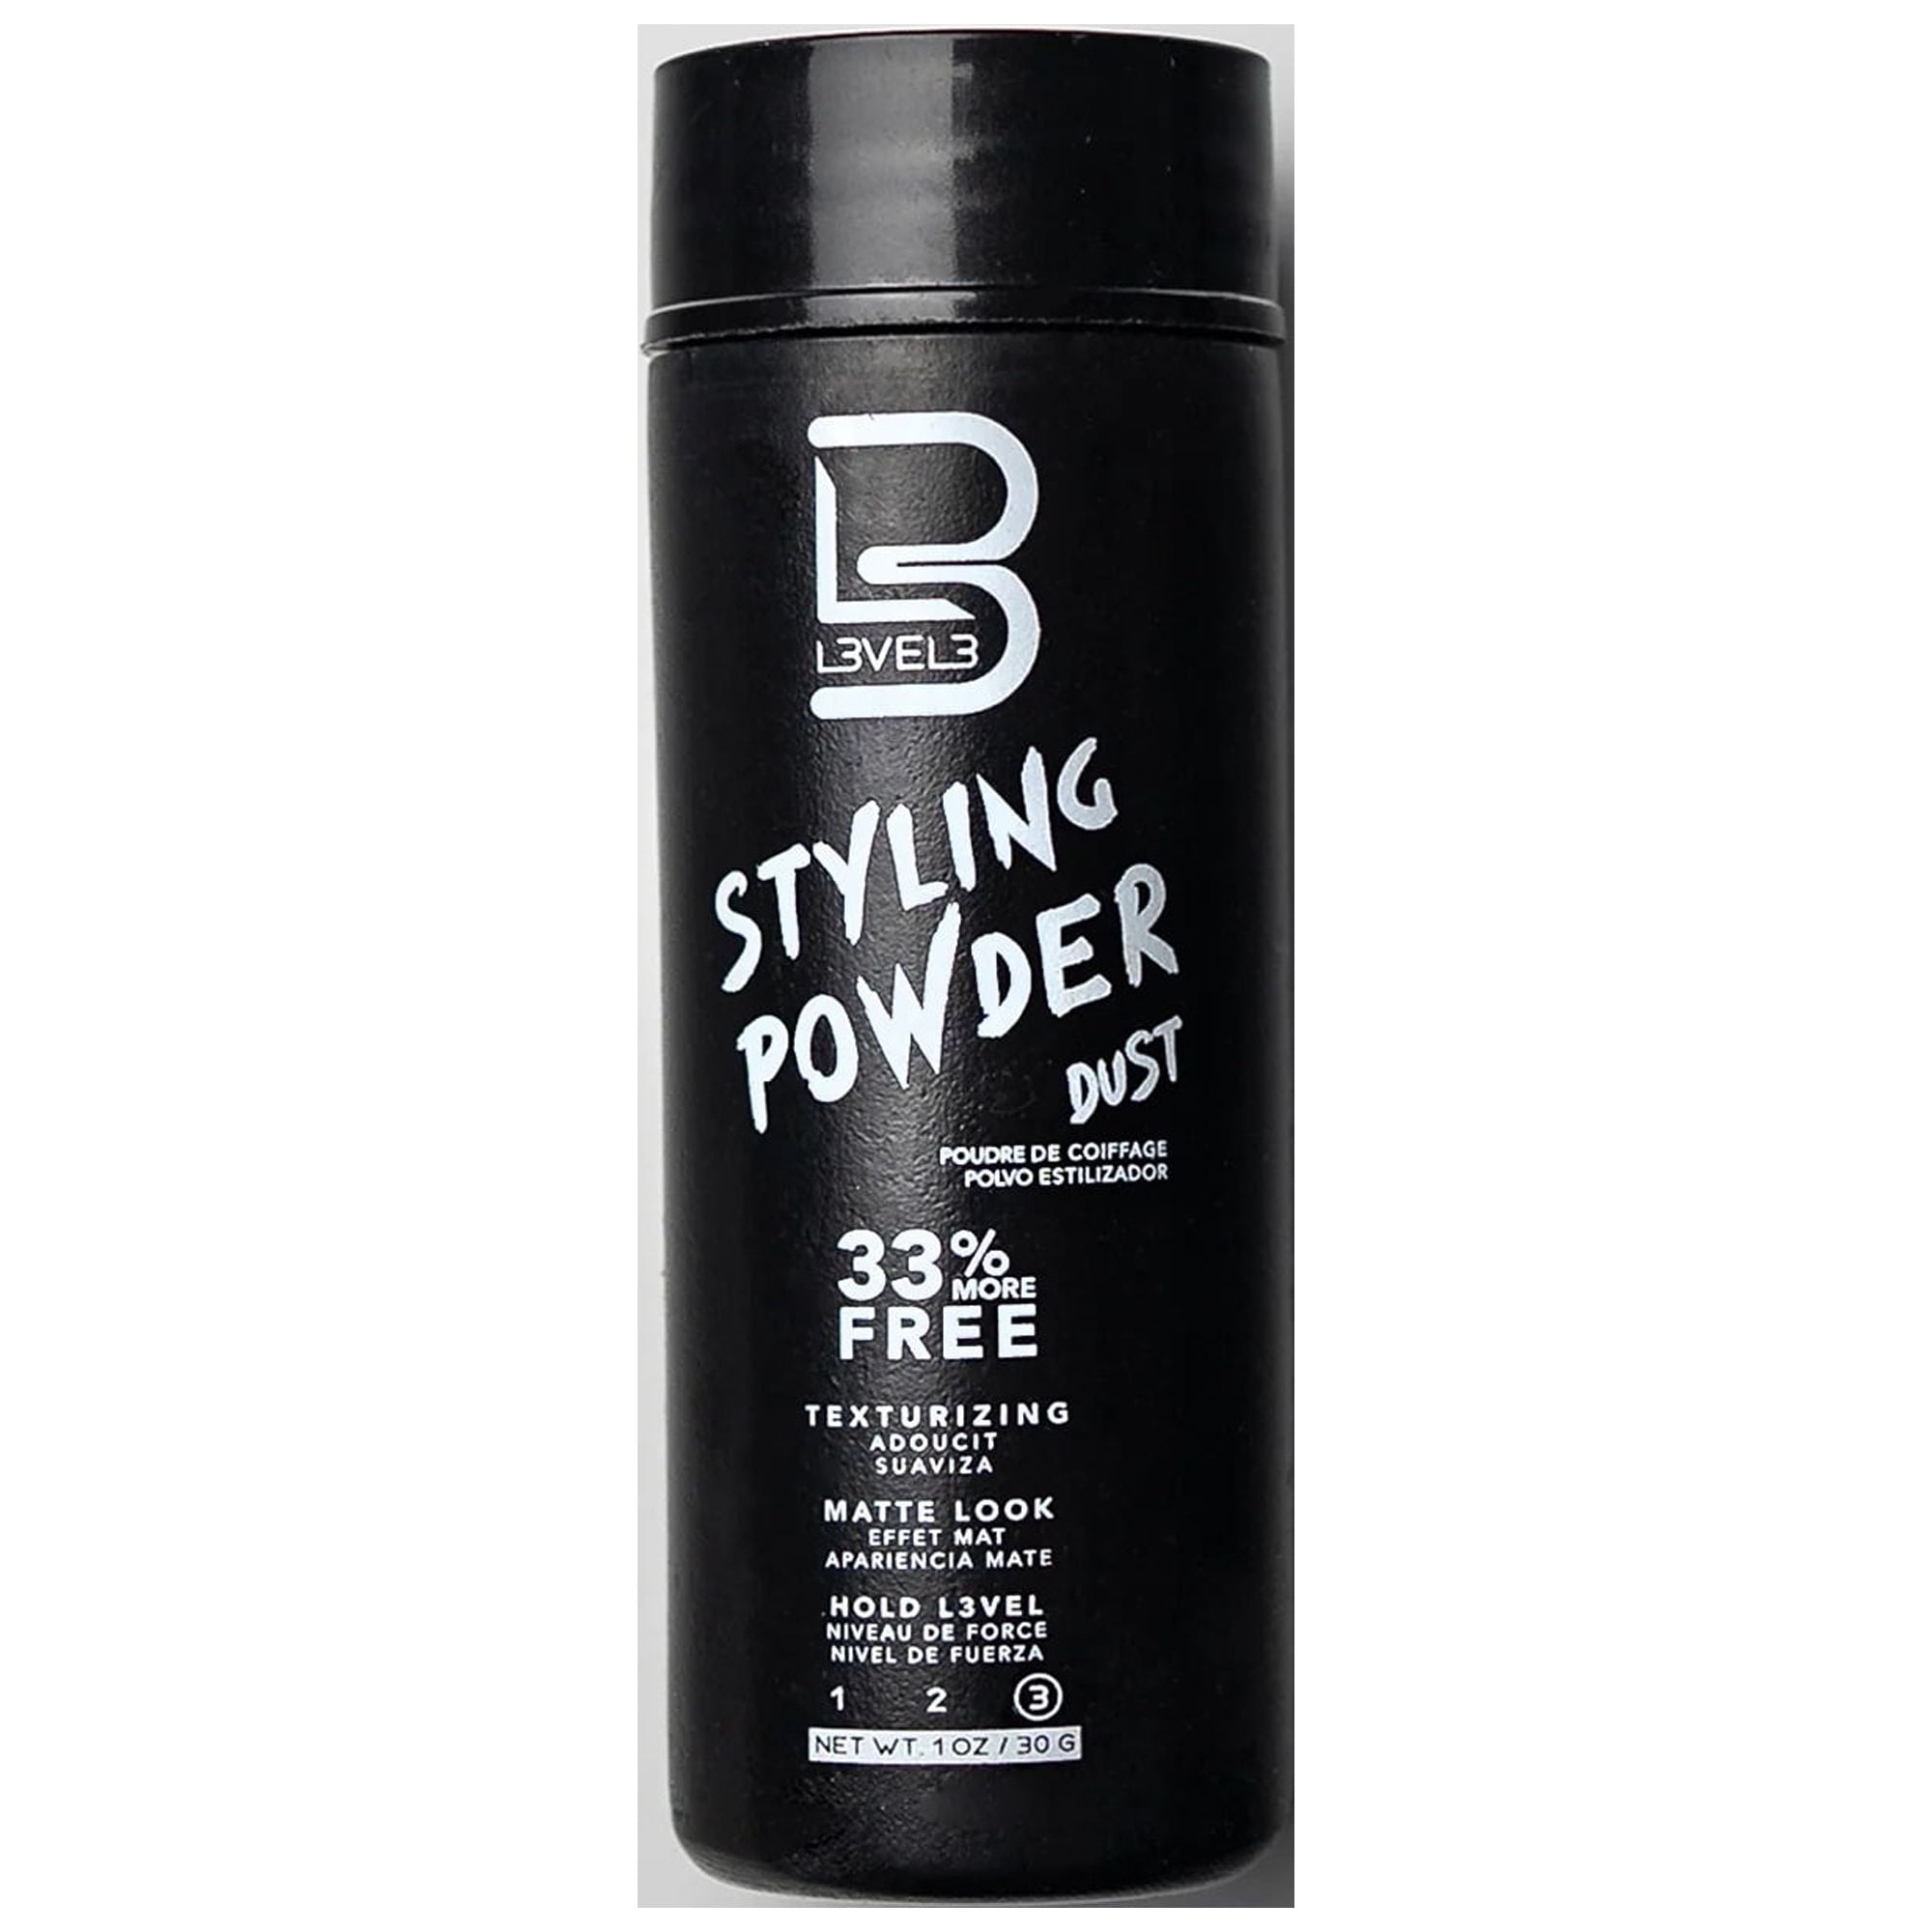 Buy the Hair Texturizing Styling Powder